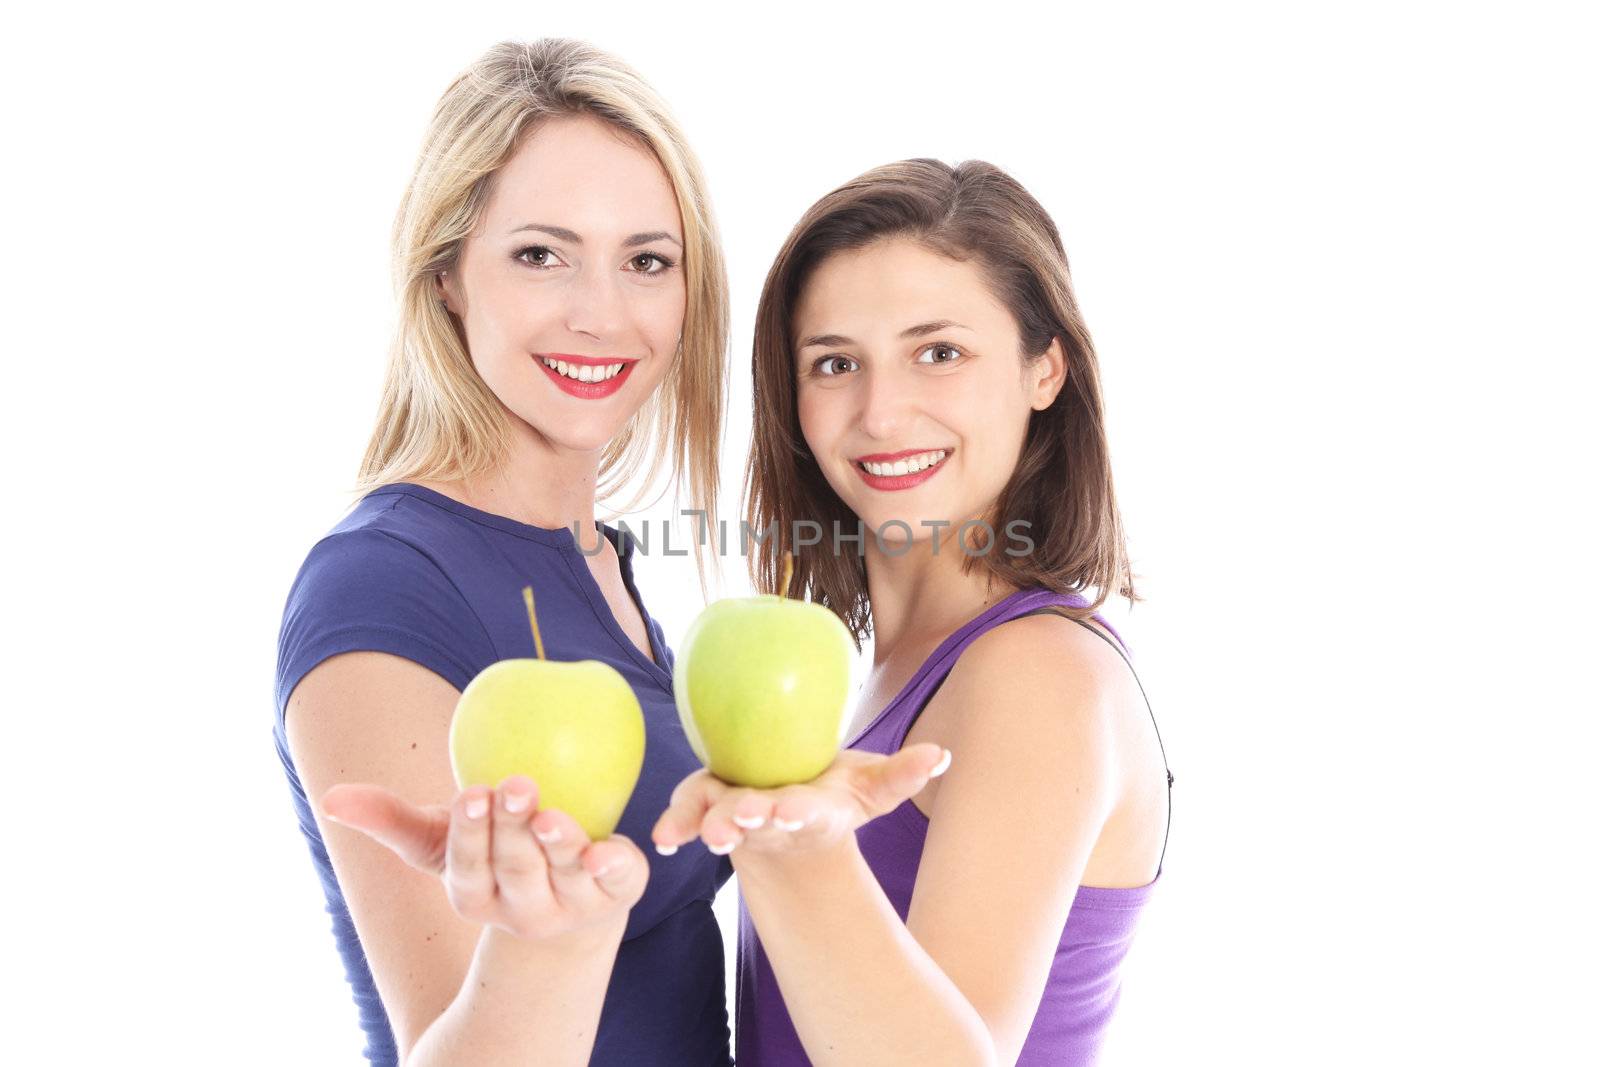 Two happy healthy women standing with their palms extended holding juicy ripe apples in a diet and fitness concept 